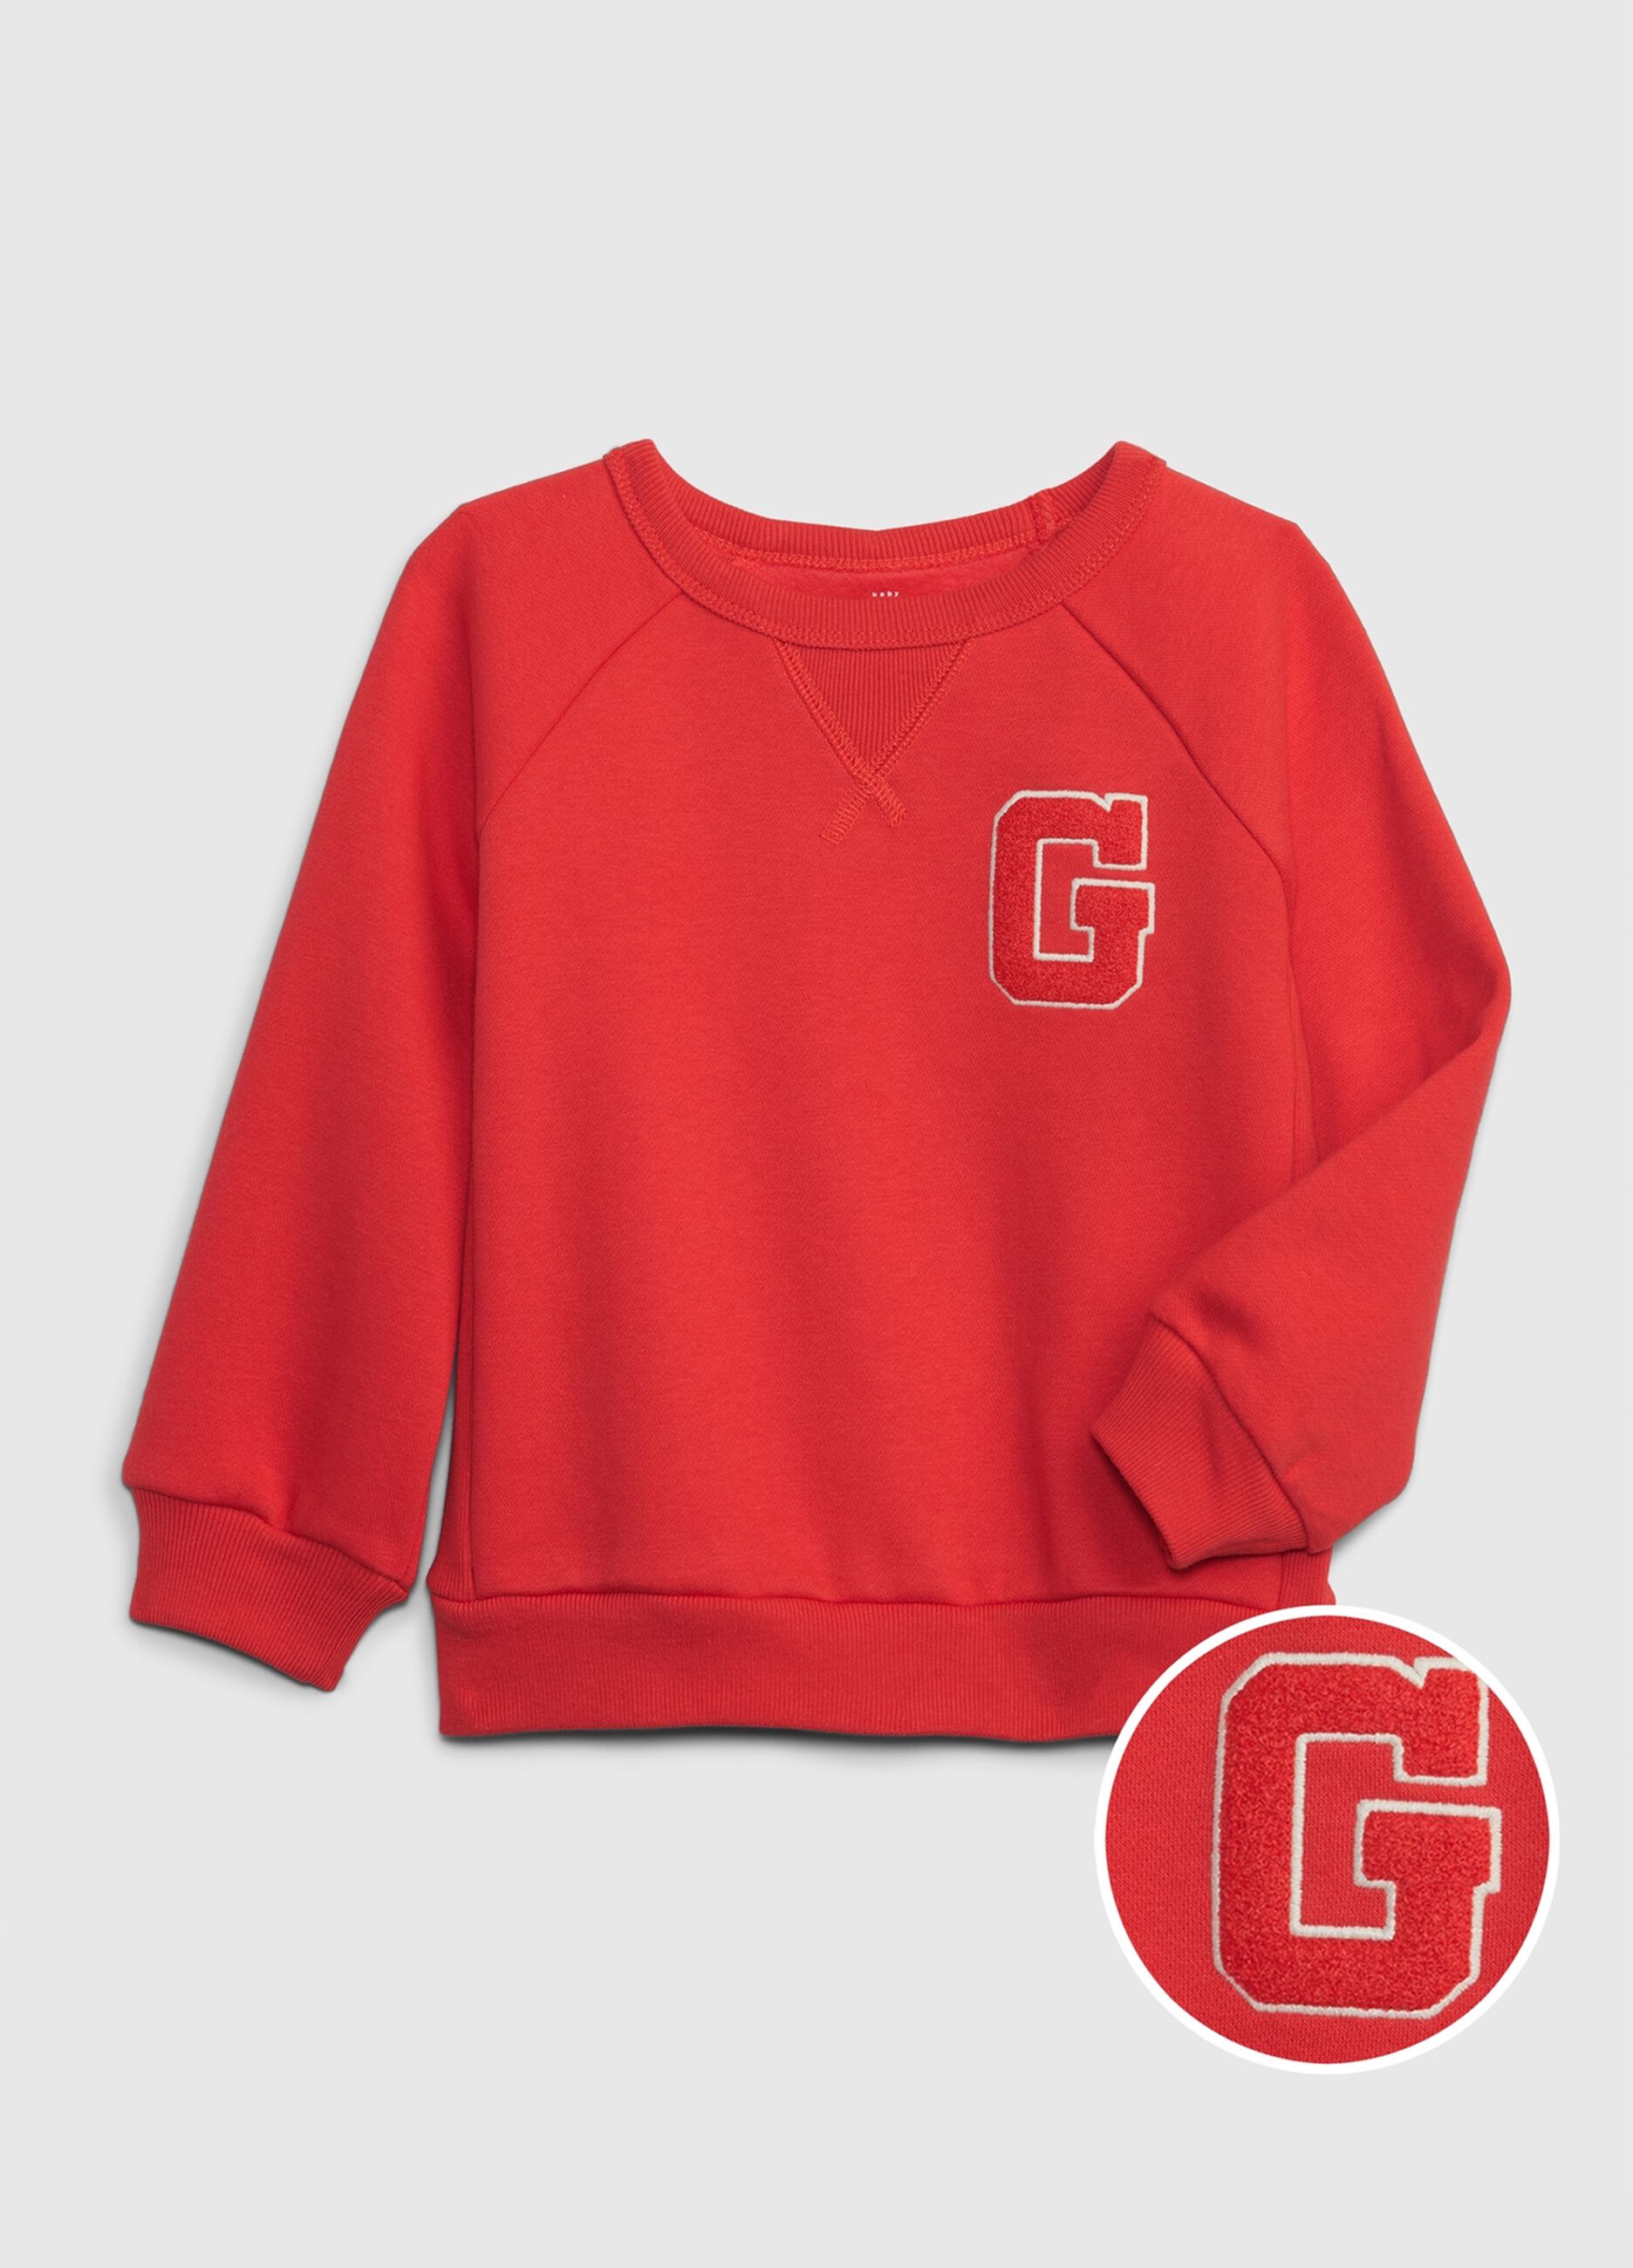 Sweatshirt with round neck and logo embroidery